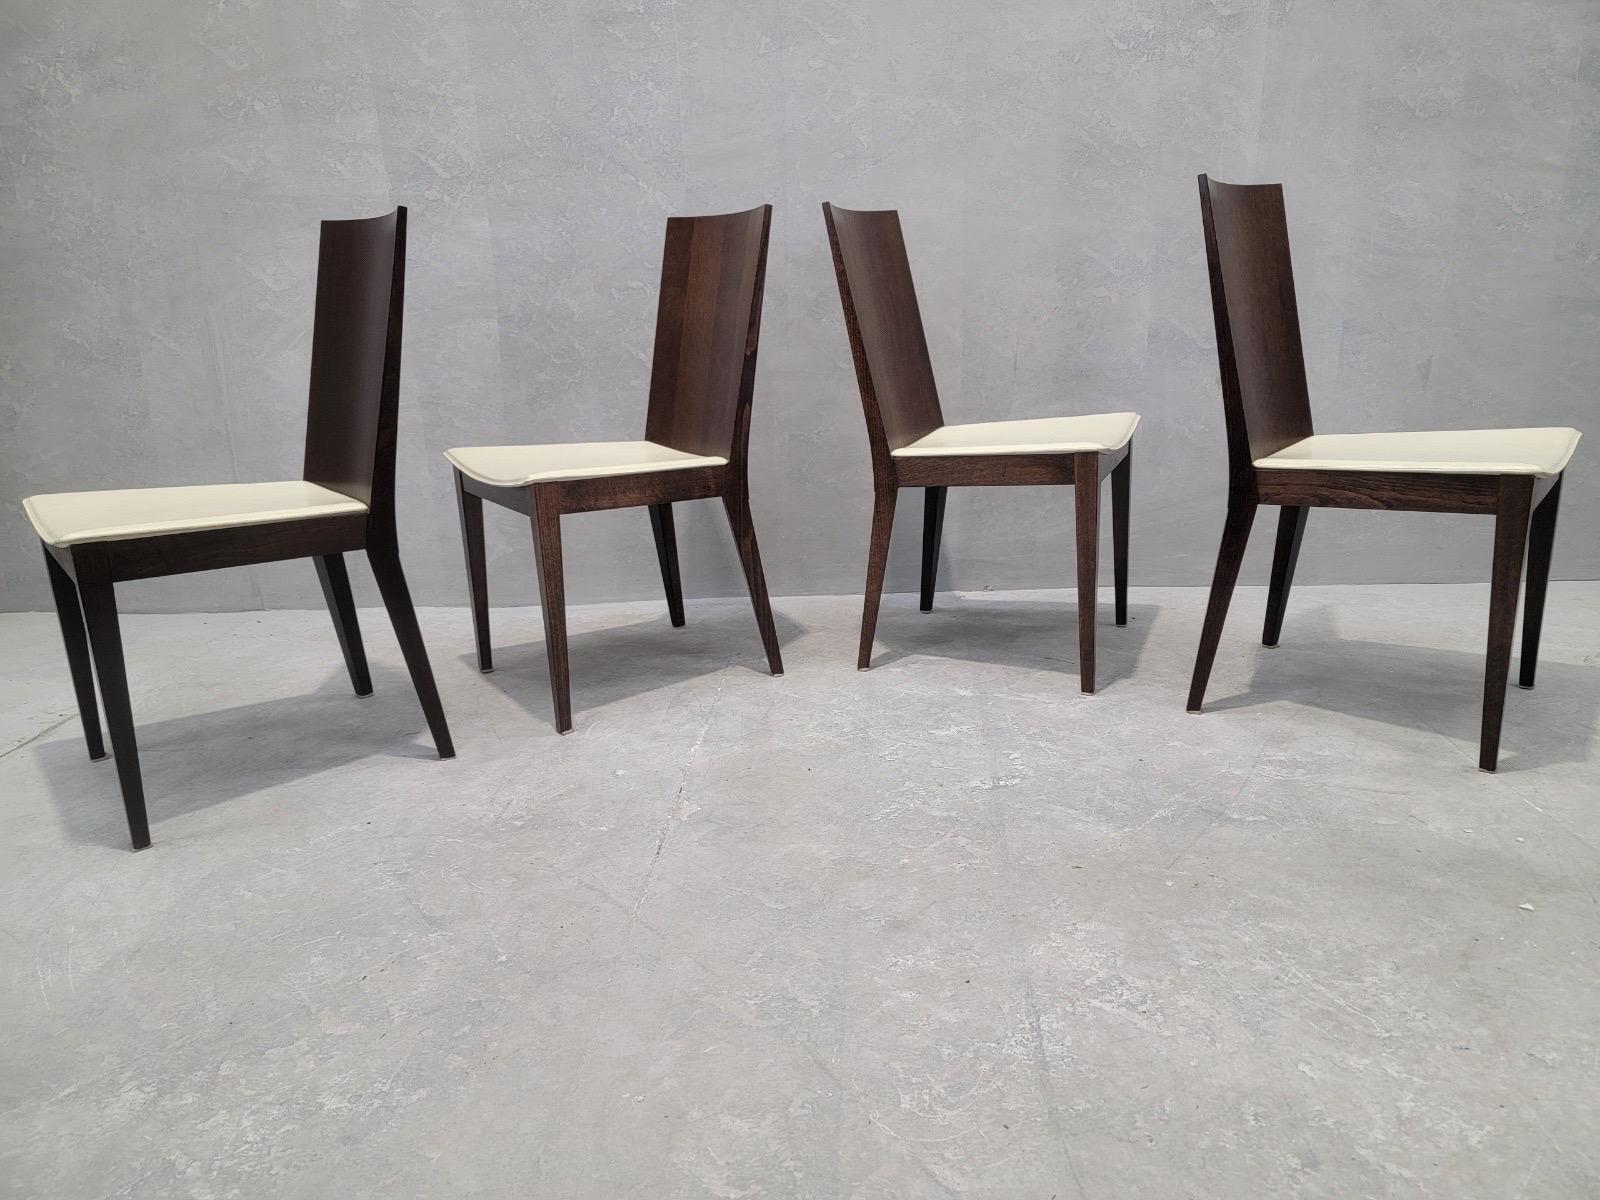 Contemporary Postmodern Italian Walnut & Leather Dining Chairs by Calligaris - Set of 6 For Sale